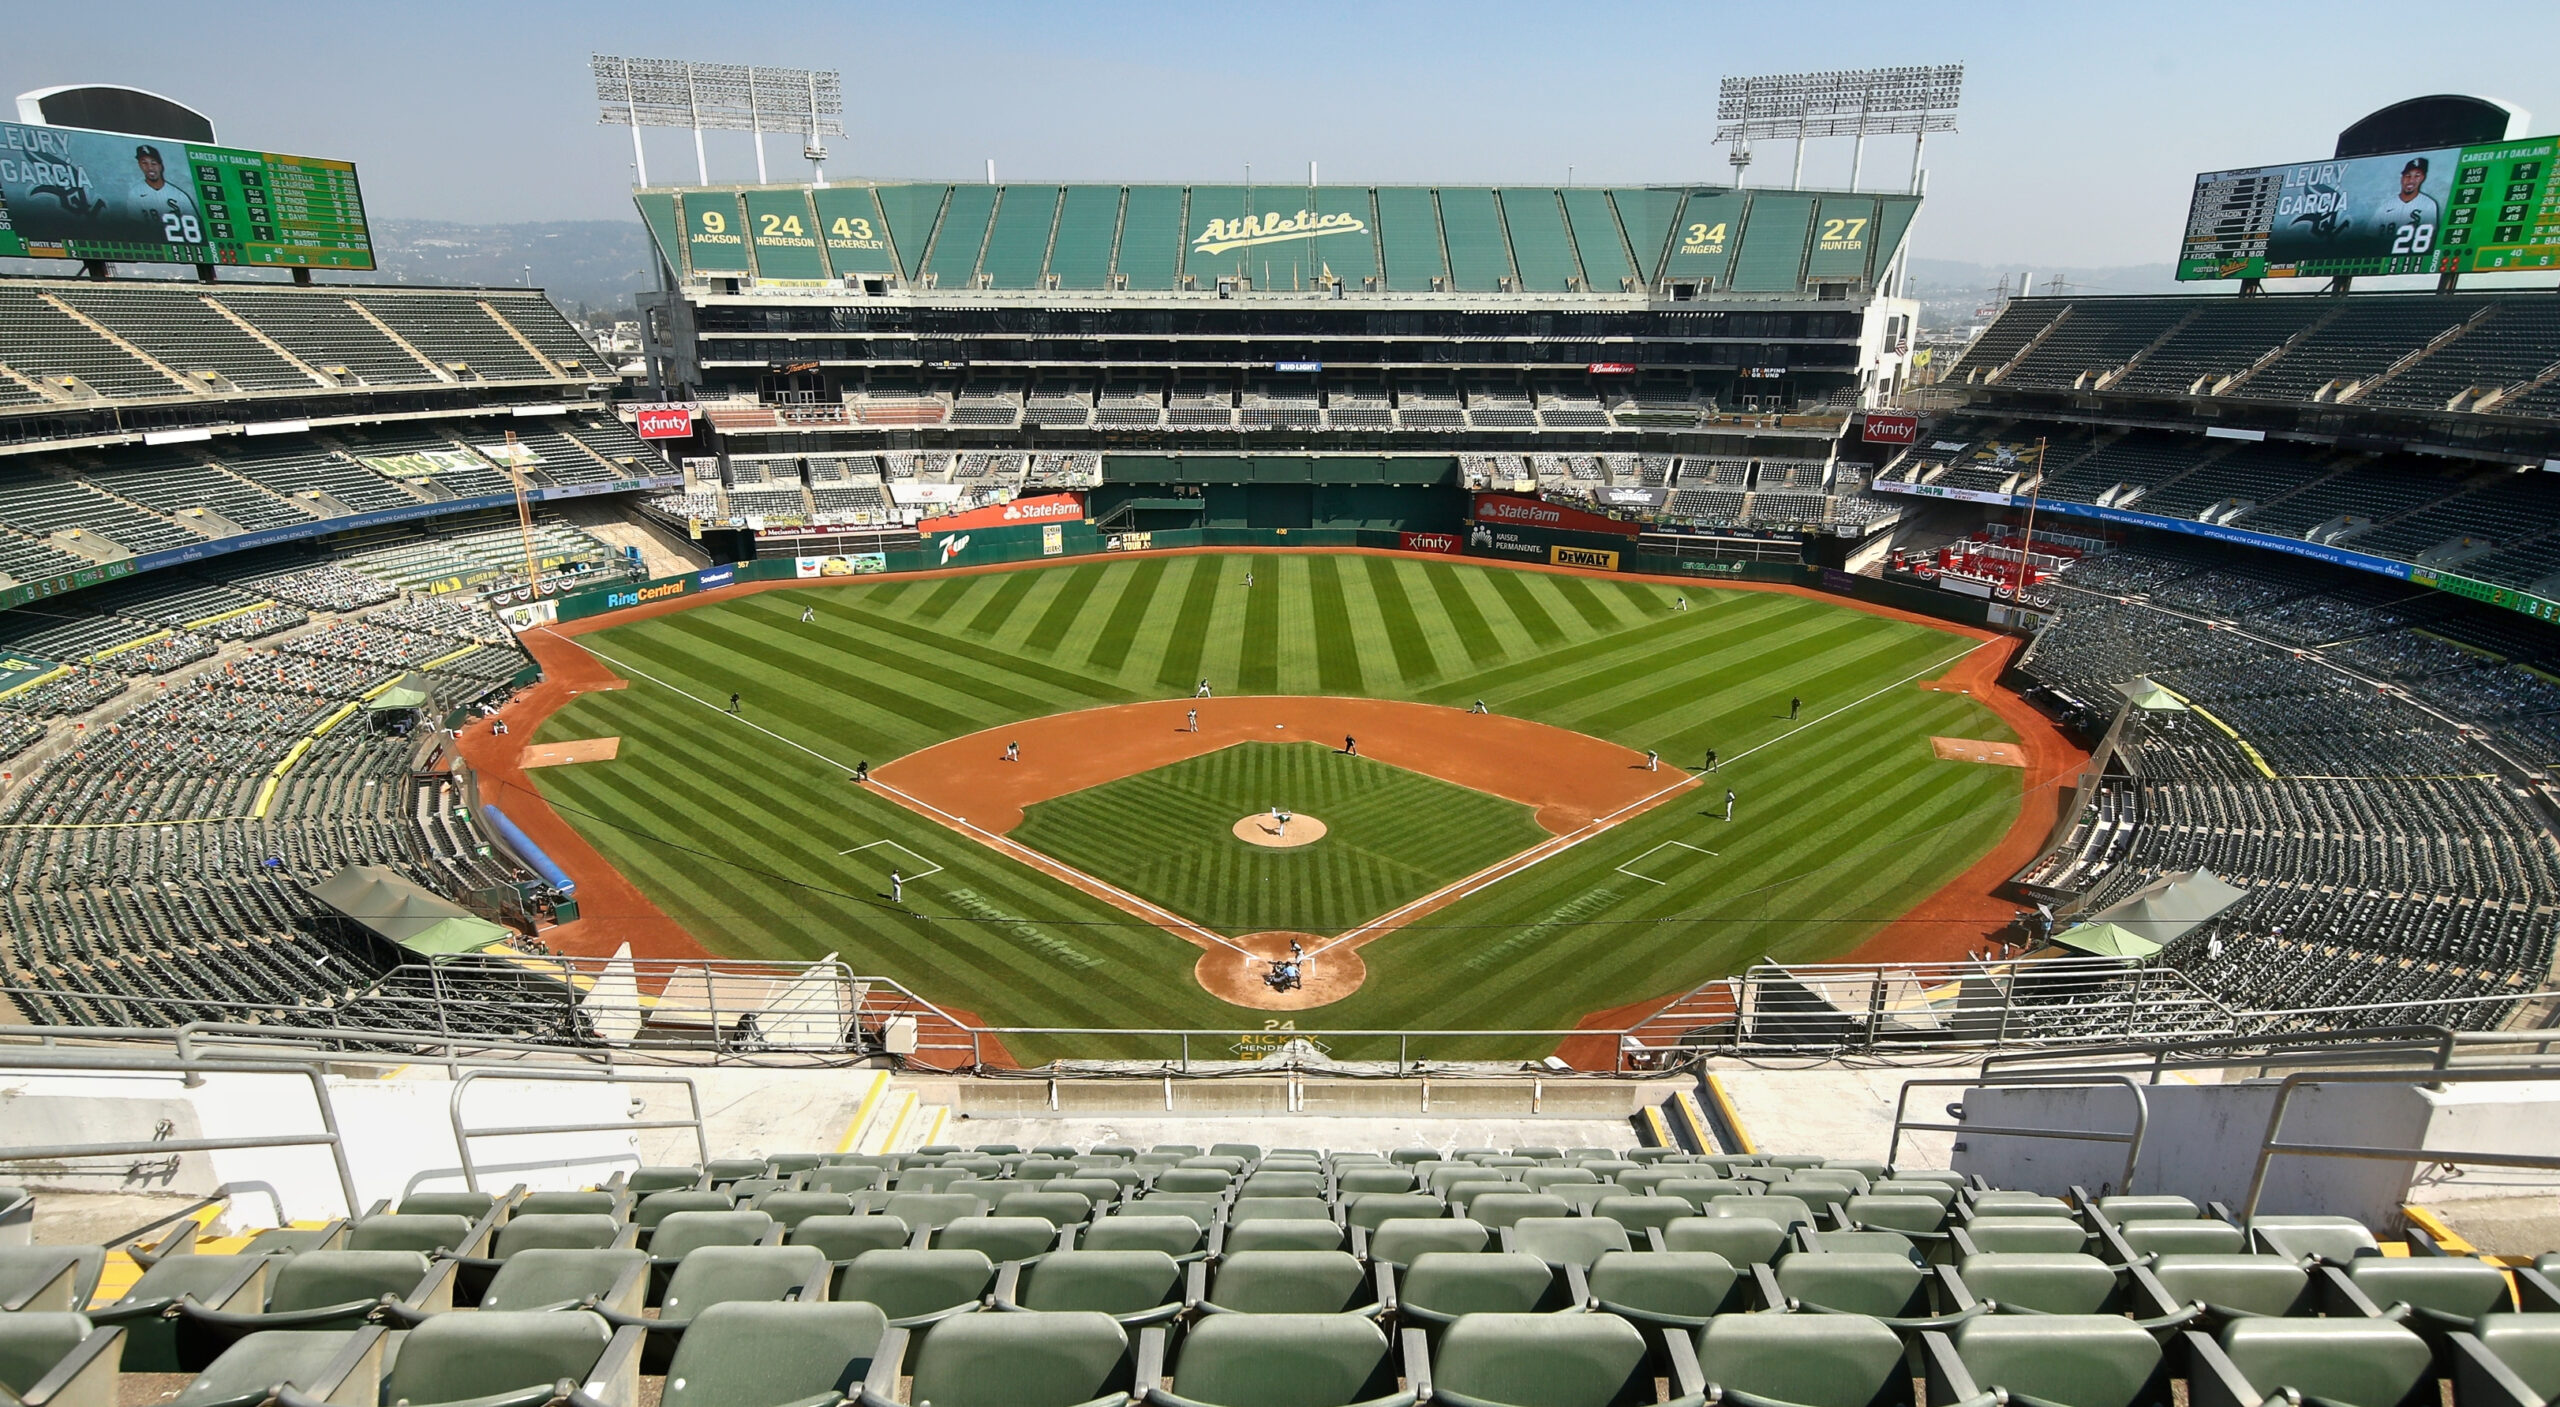 A's in Las Vegas: A hypothetical look at new logo, uniforms and stadium